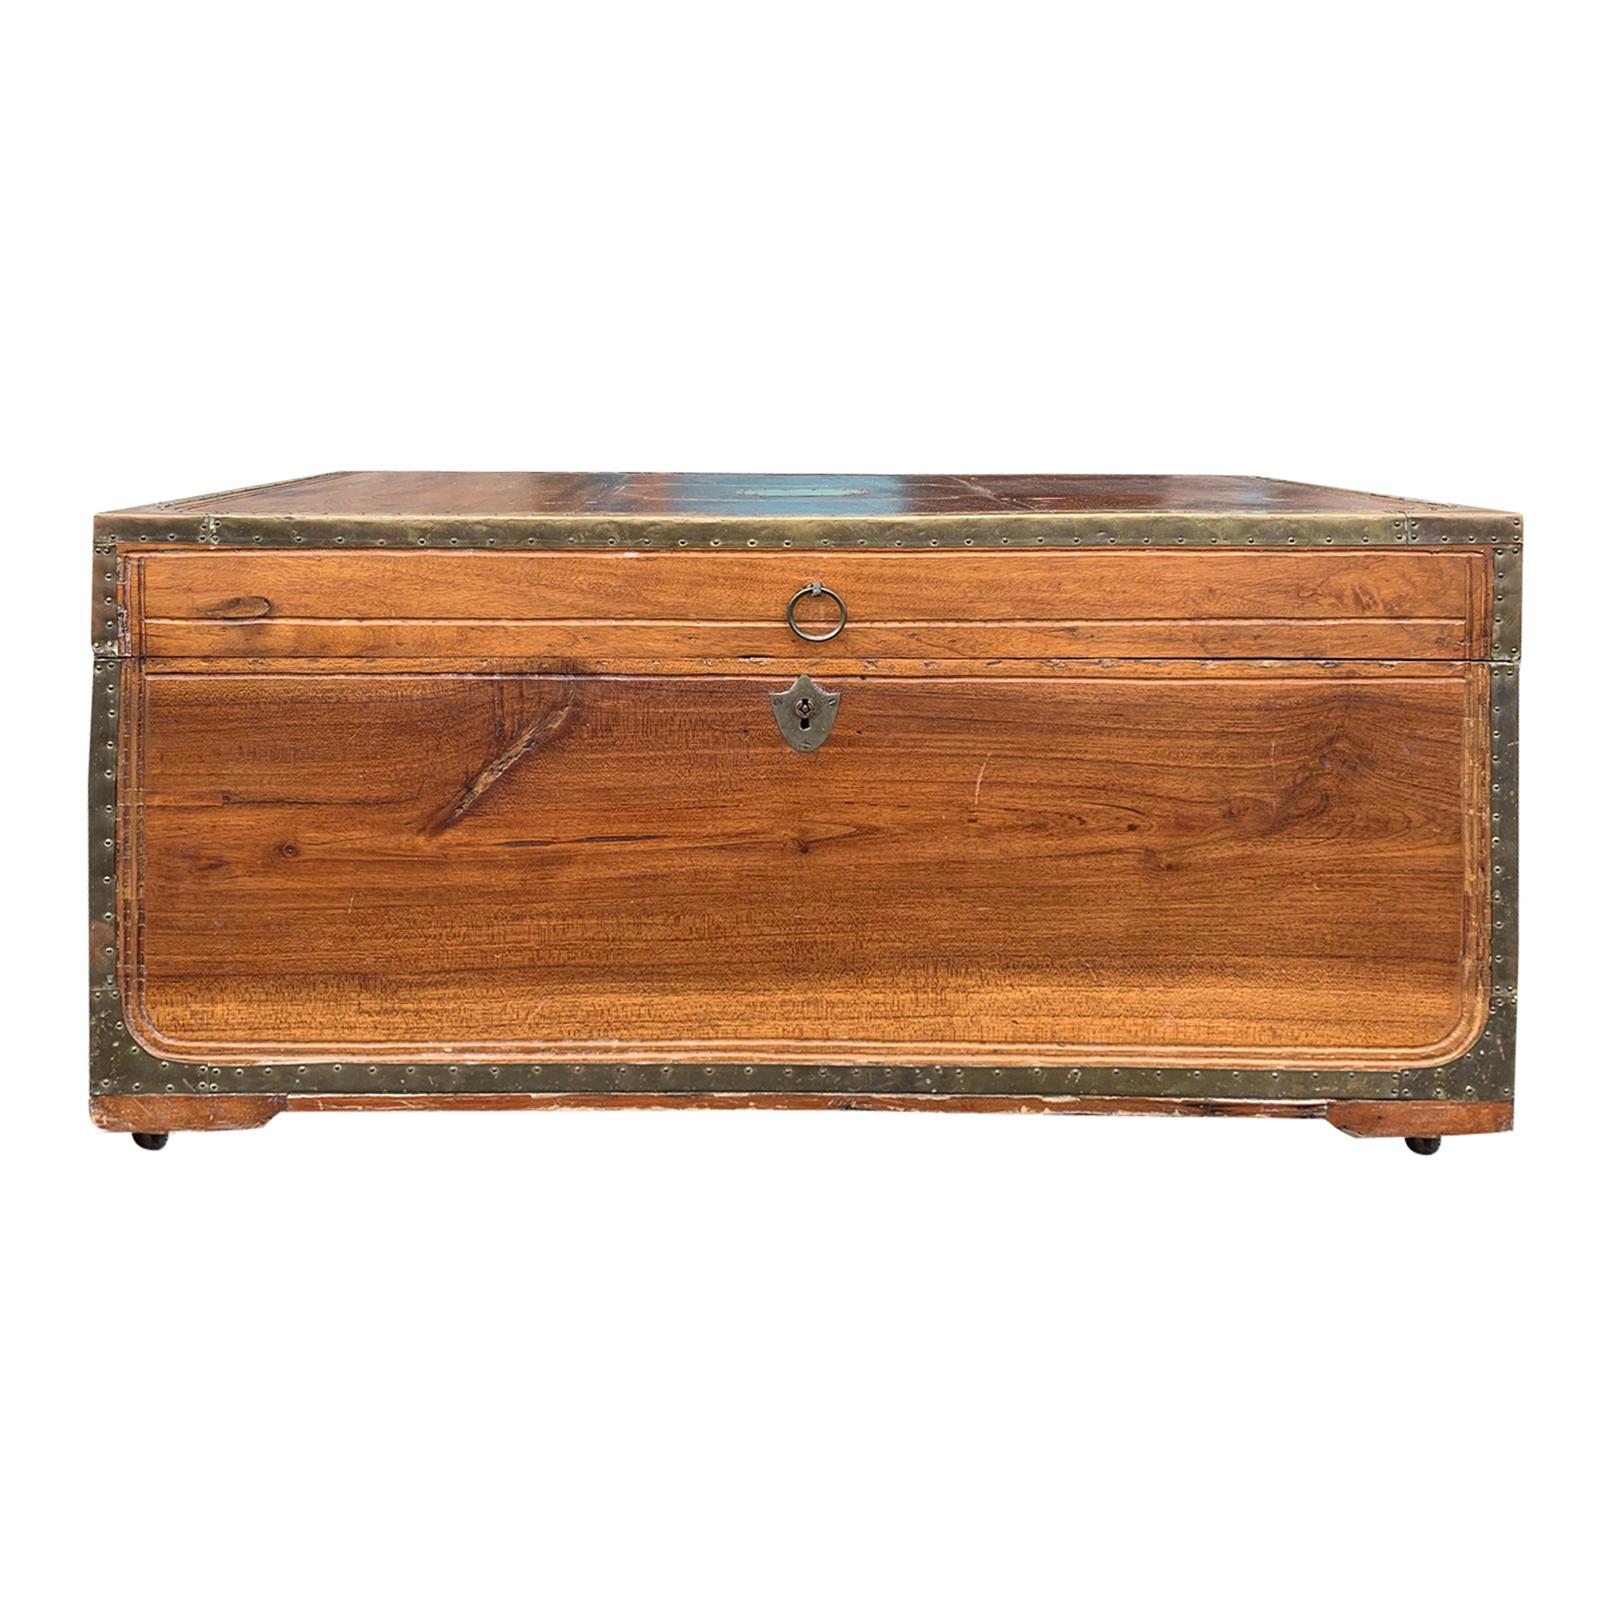 19th Century Anglo-Indian Wood Trunk with Wheels